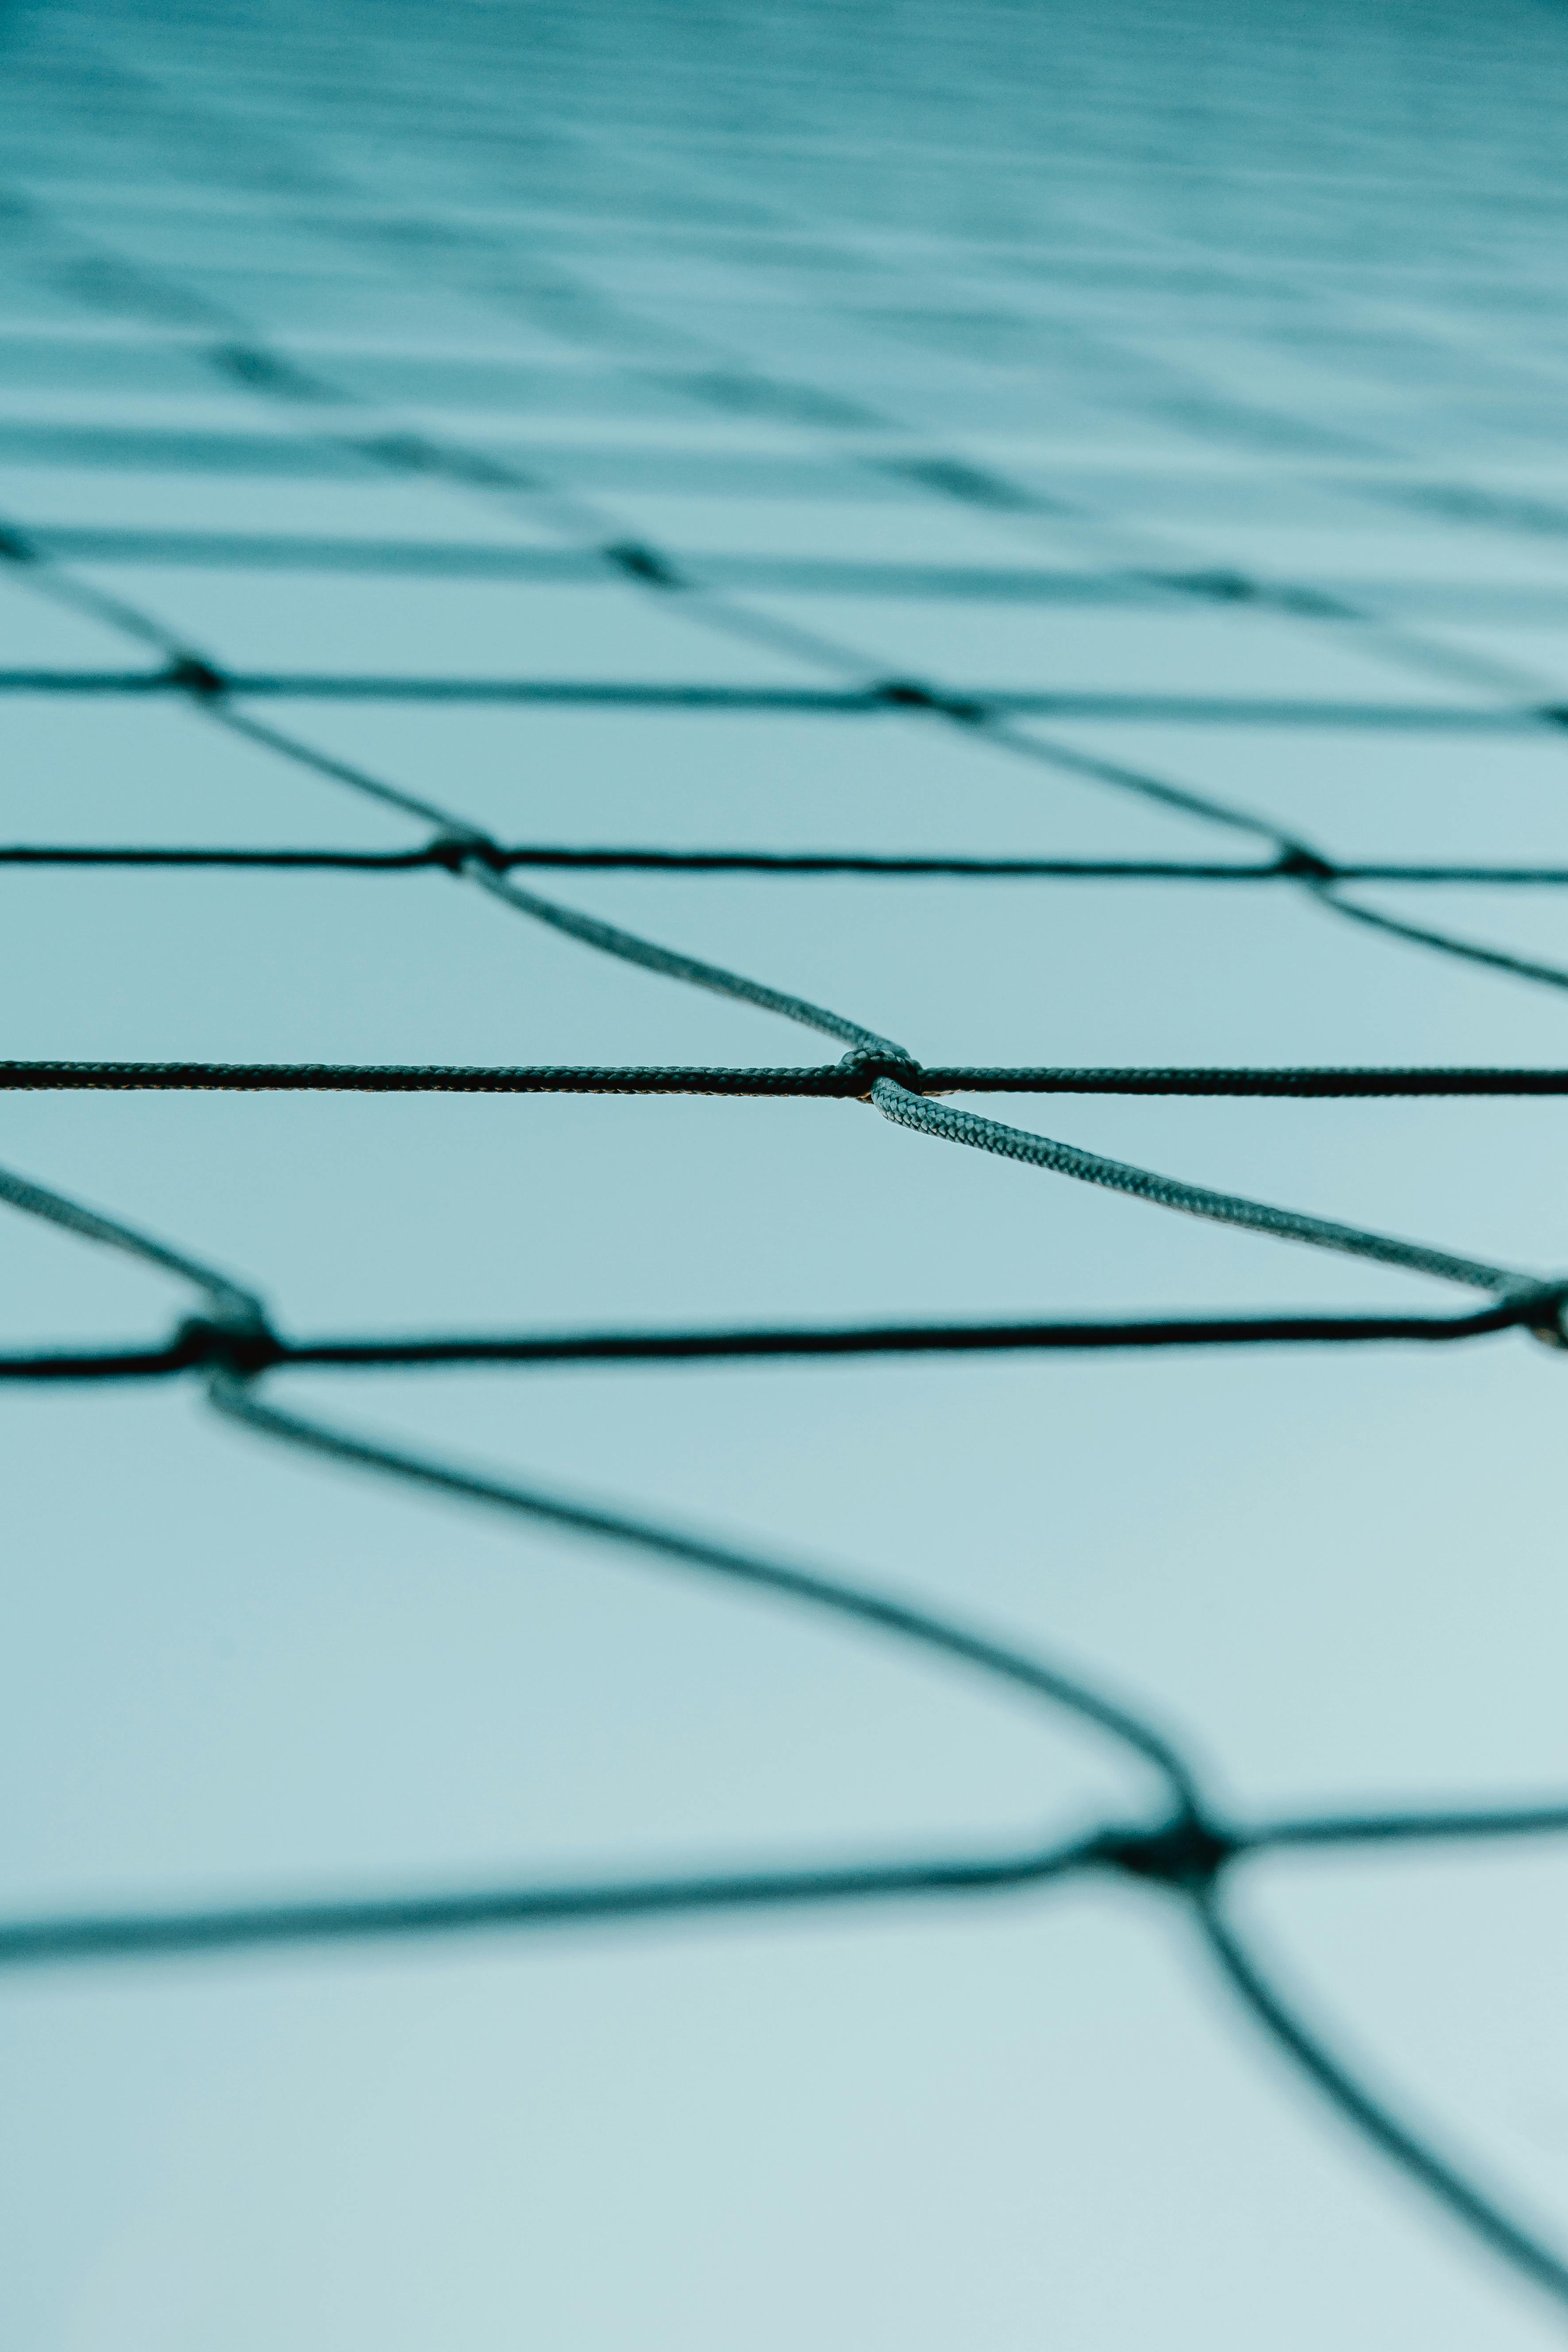 chain link fence against sky